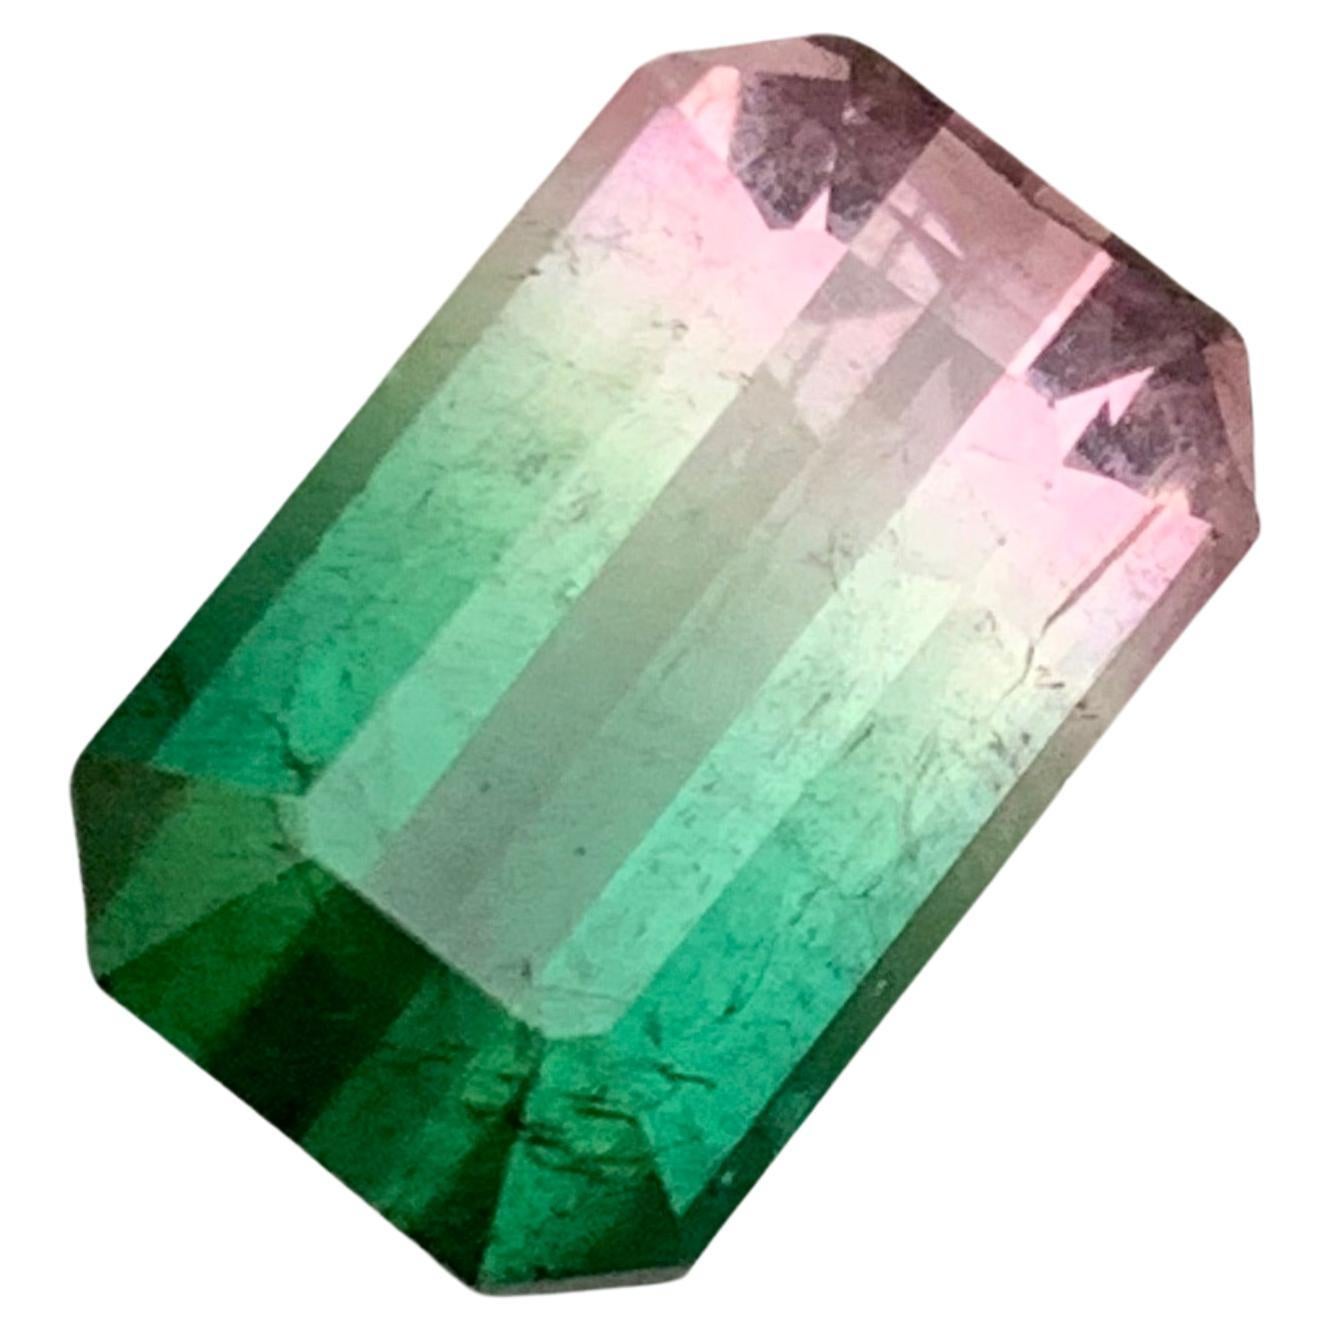 Rare Watermelon Bicolor Bluish Green & Pink Tourmaline Gemstone 7.30 Ct for Ring For Sale